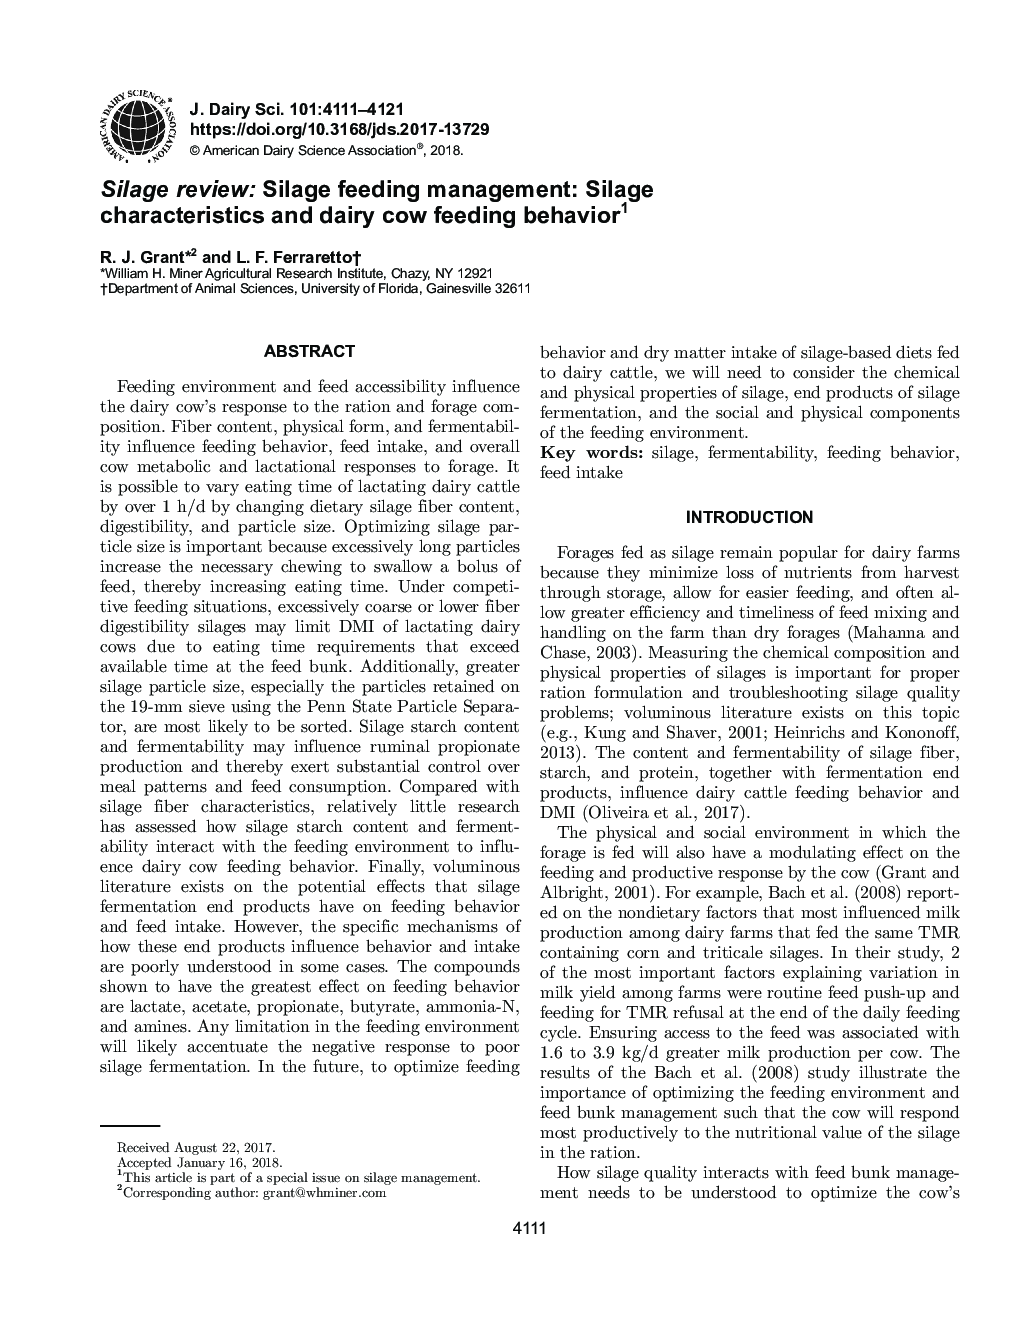 Silage review: Silage feeding management: Silage characteristics and dairy cow feeding behavior